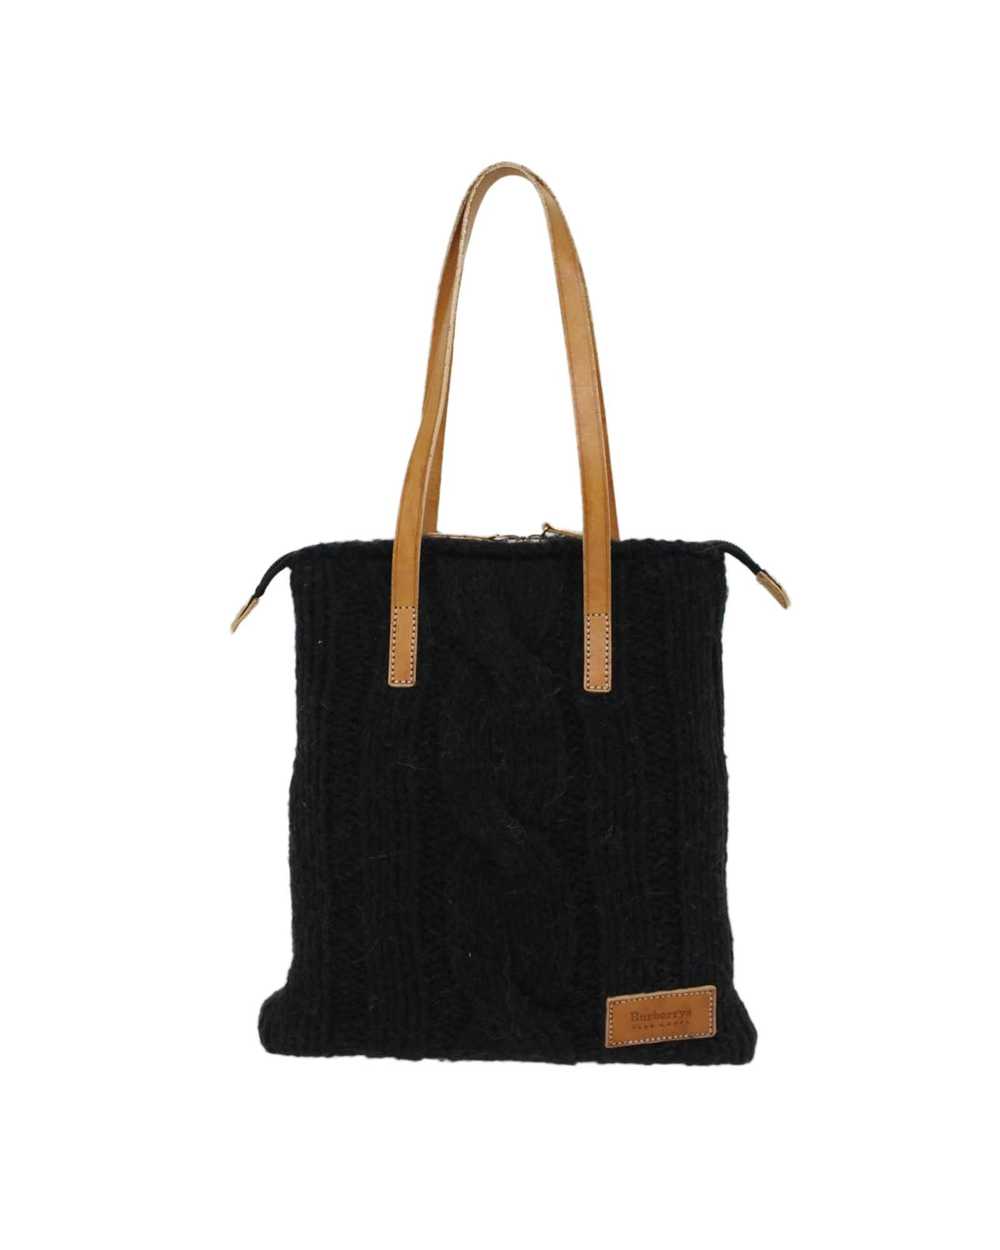 Burberry Classic Wool Tote Bag - image 2